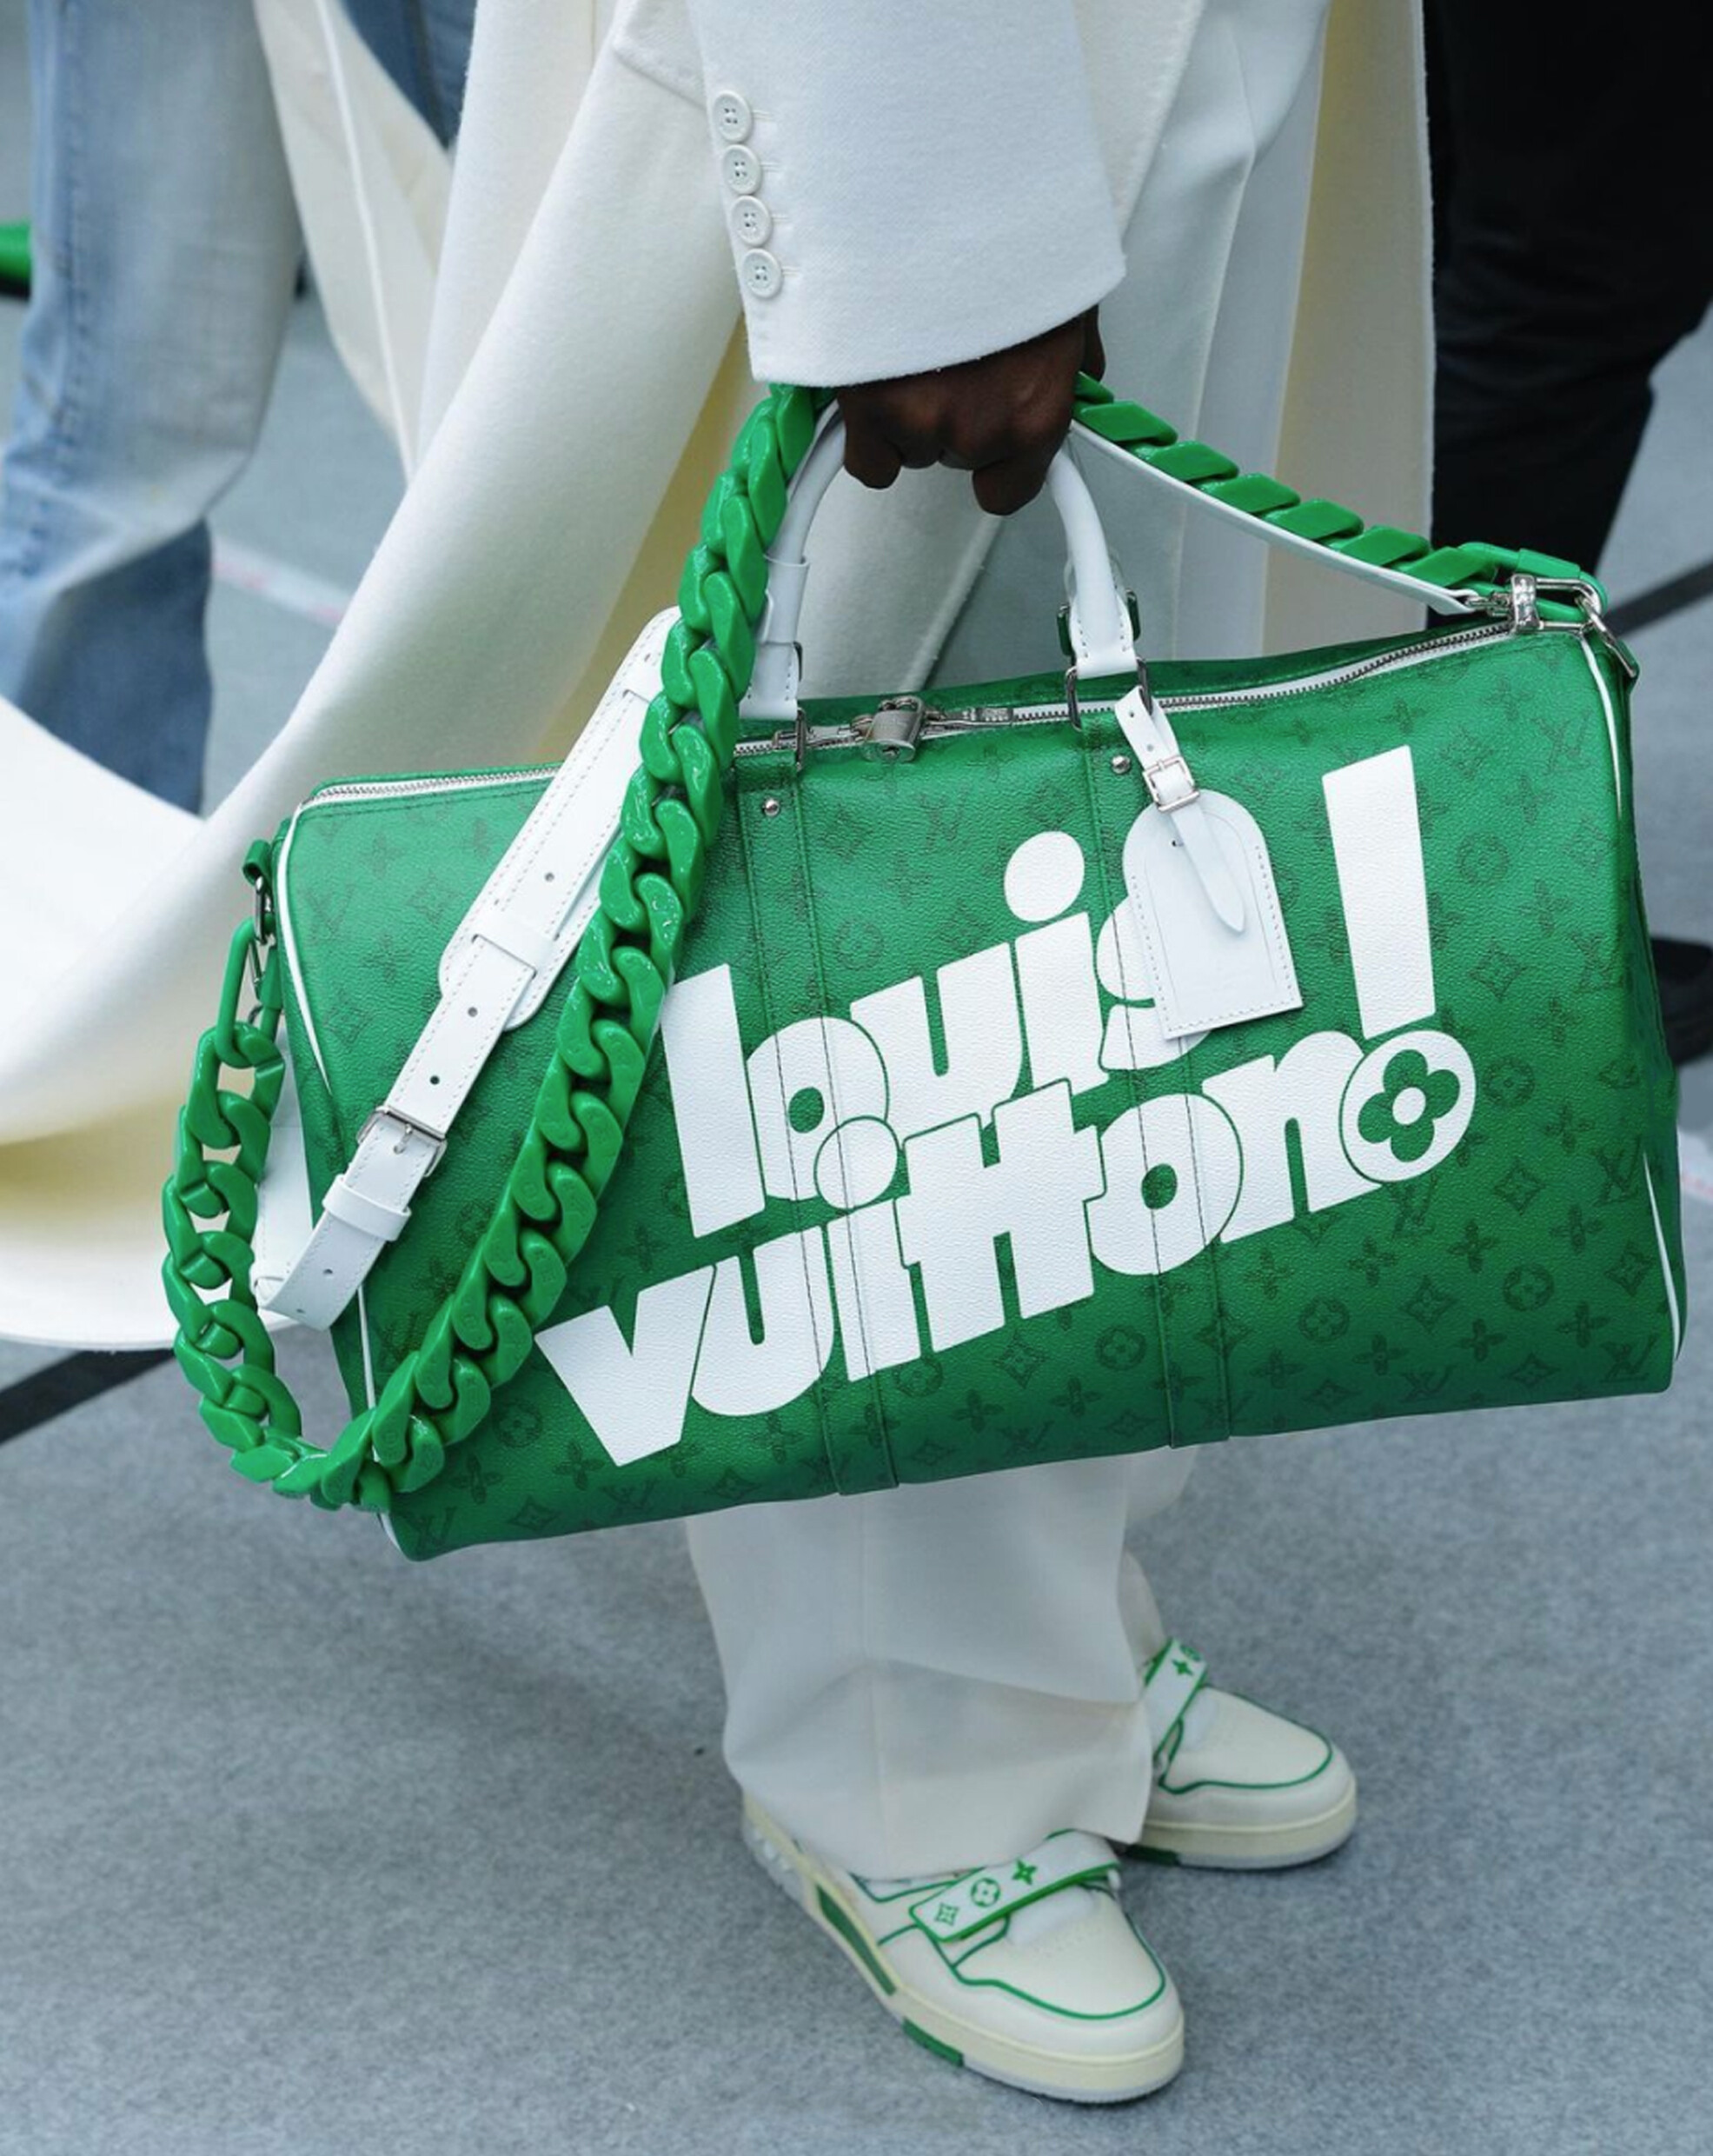 BTS Model Louis Vuitton's Spin-Off AW21 Collection